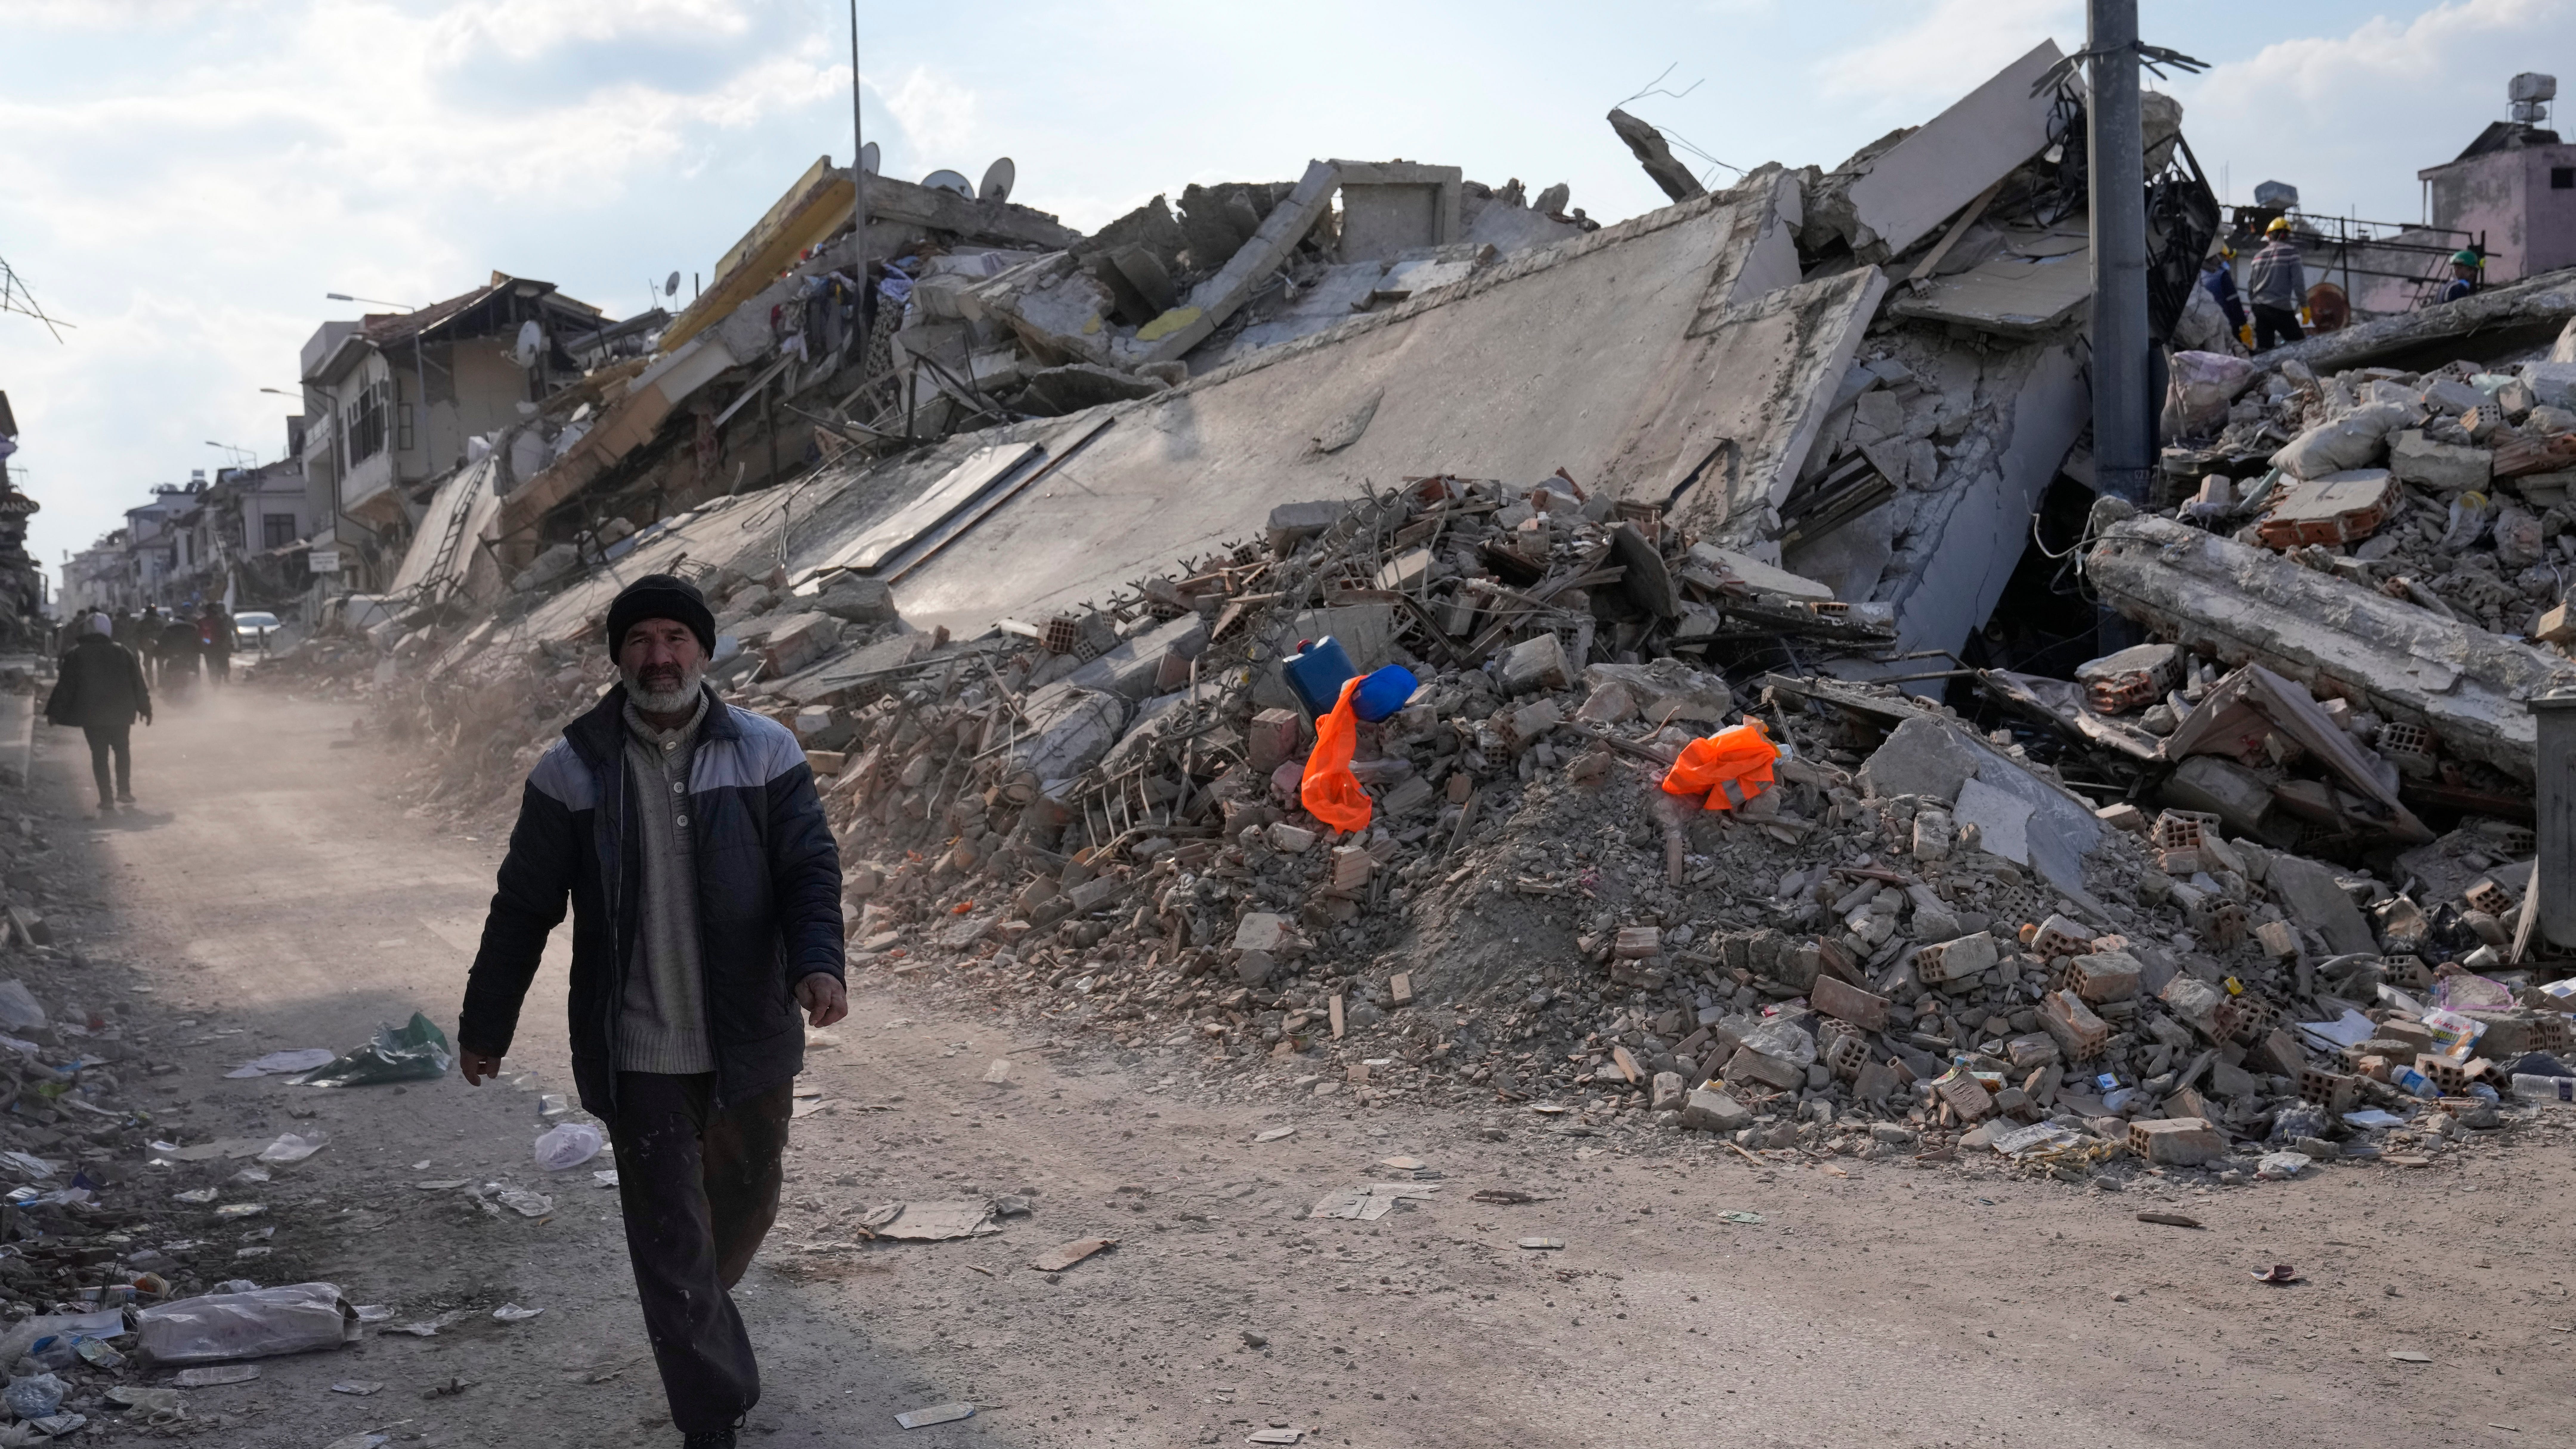 A man passes collapsed buildings in Antakya, Turkey, Saturday, Feb. 11, 2023. Emergency crews made a series of dramatic rescues in Turkey on Friday and Saturday, pulling several people from the rubble days after a catastrophic 7.8-magnitude earthquake killed thousands in Turkey and Syria.